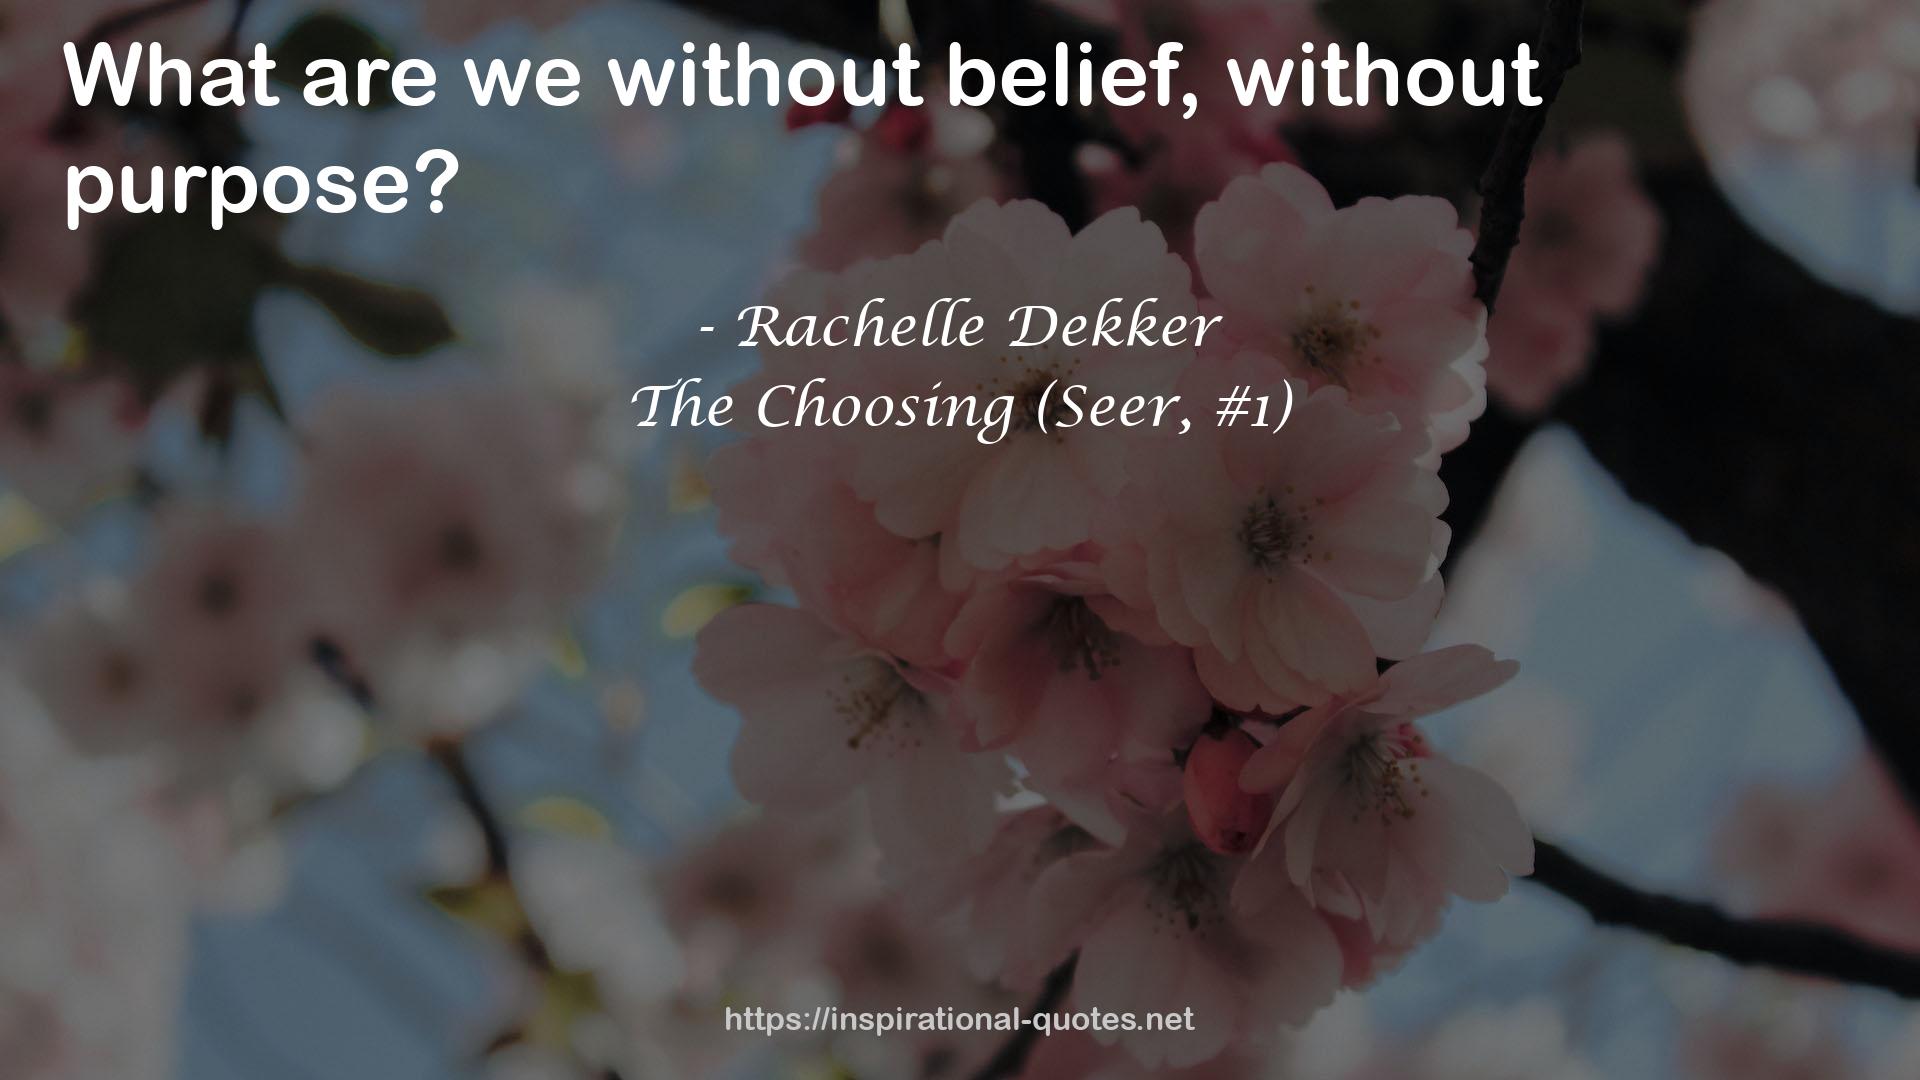 The Choosing (Seer, #1) QUOTES